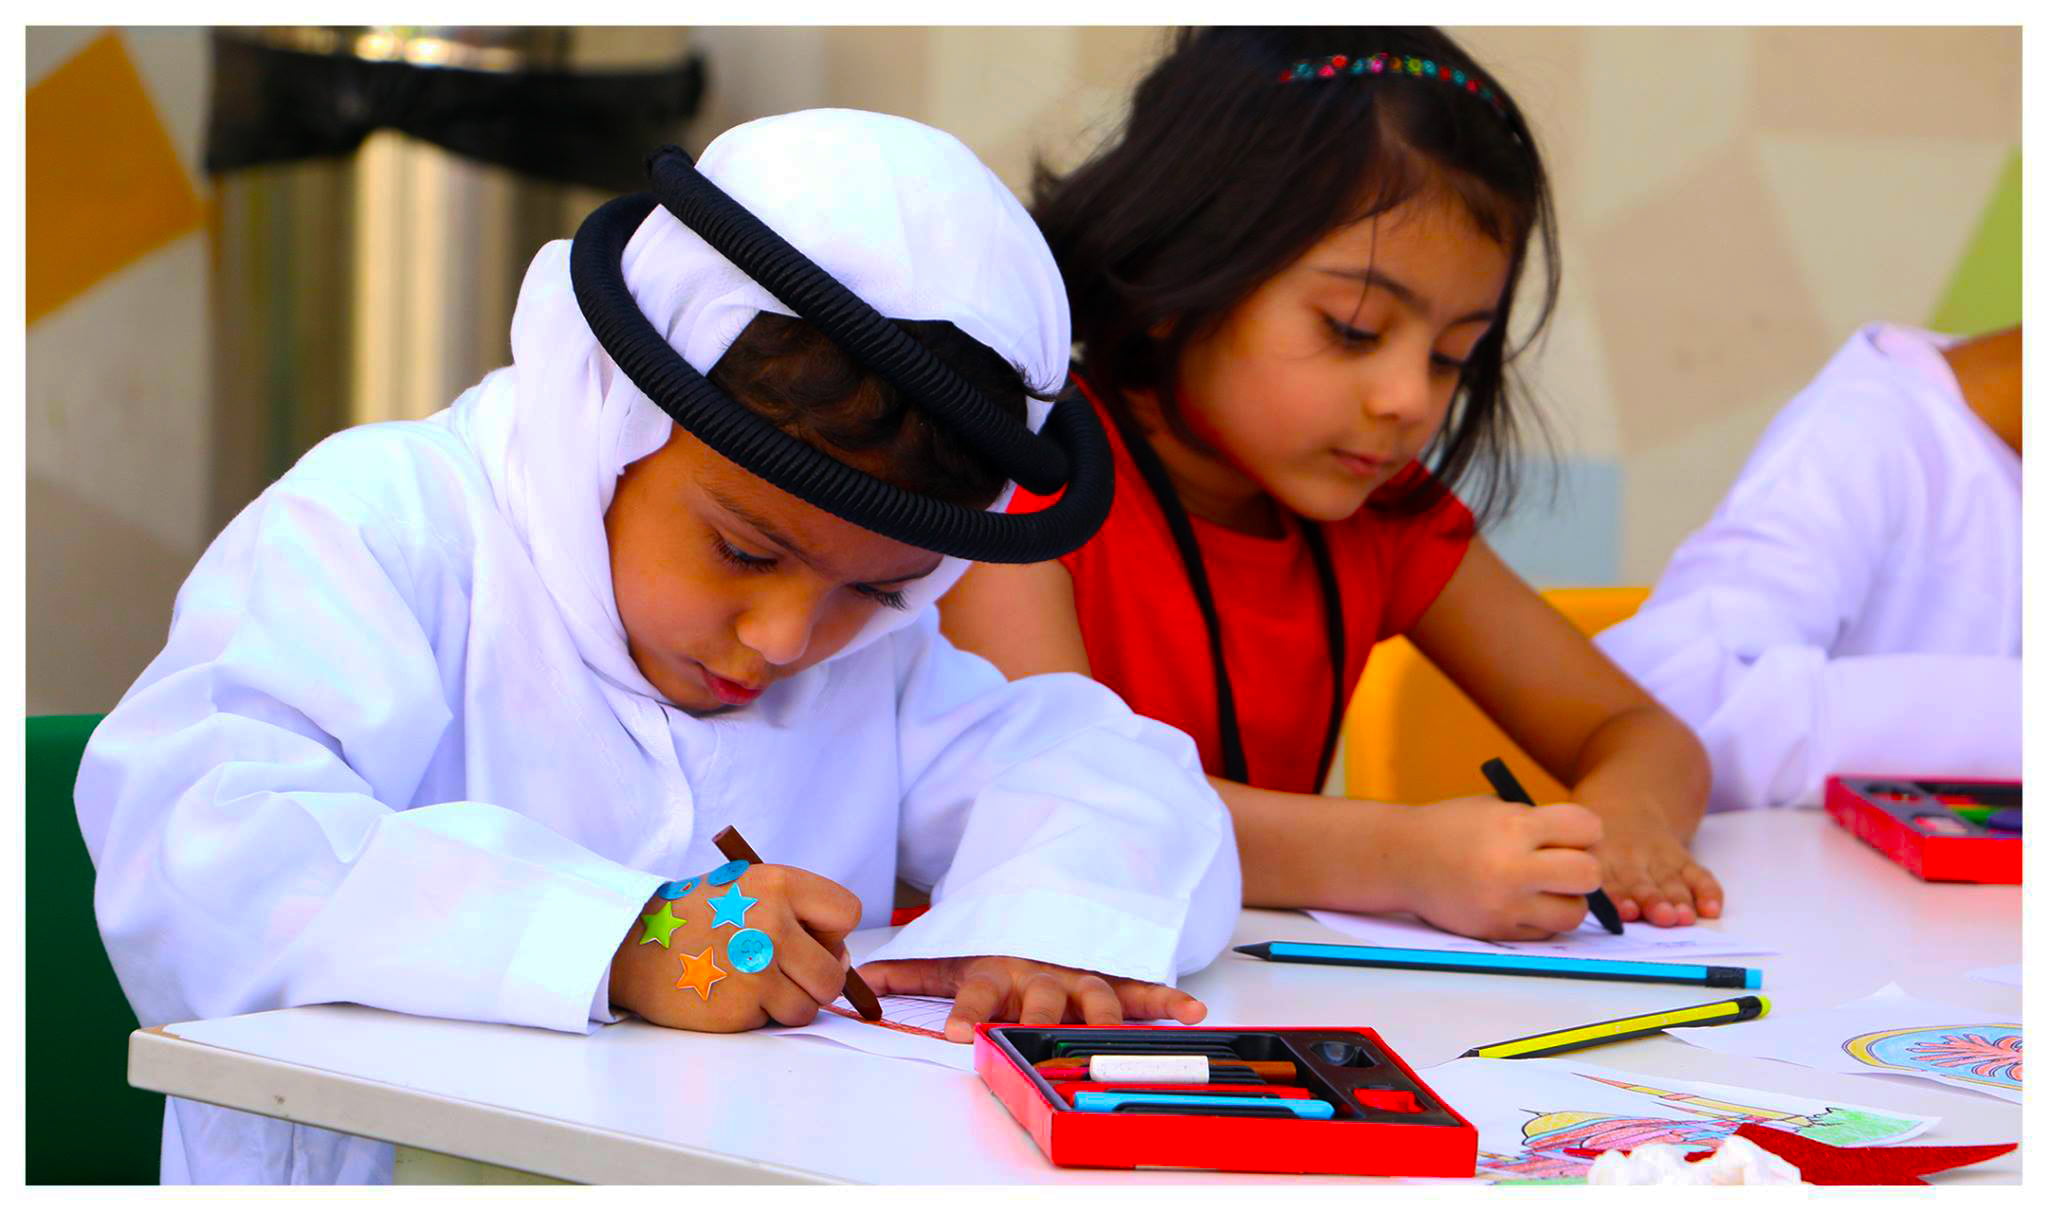 Photograph of children at the Ambassador Kindergarten and Nursery in Dubai engaged in art-based learning to develop creativity and fine motoring skills